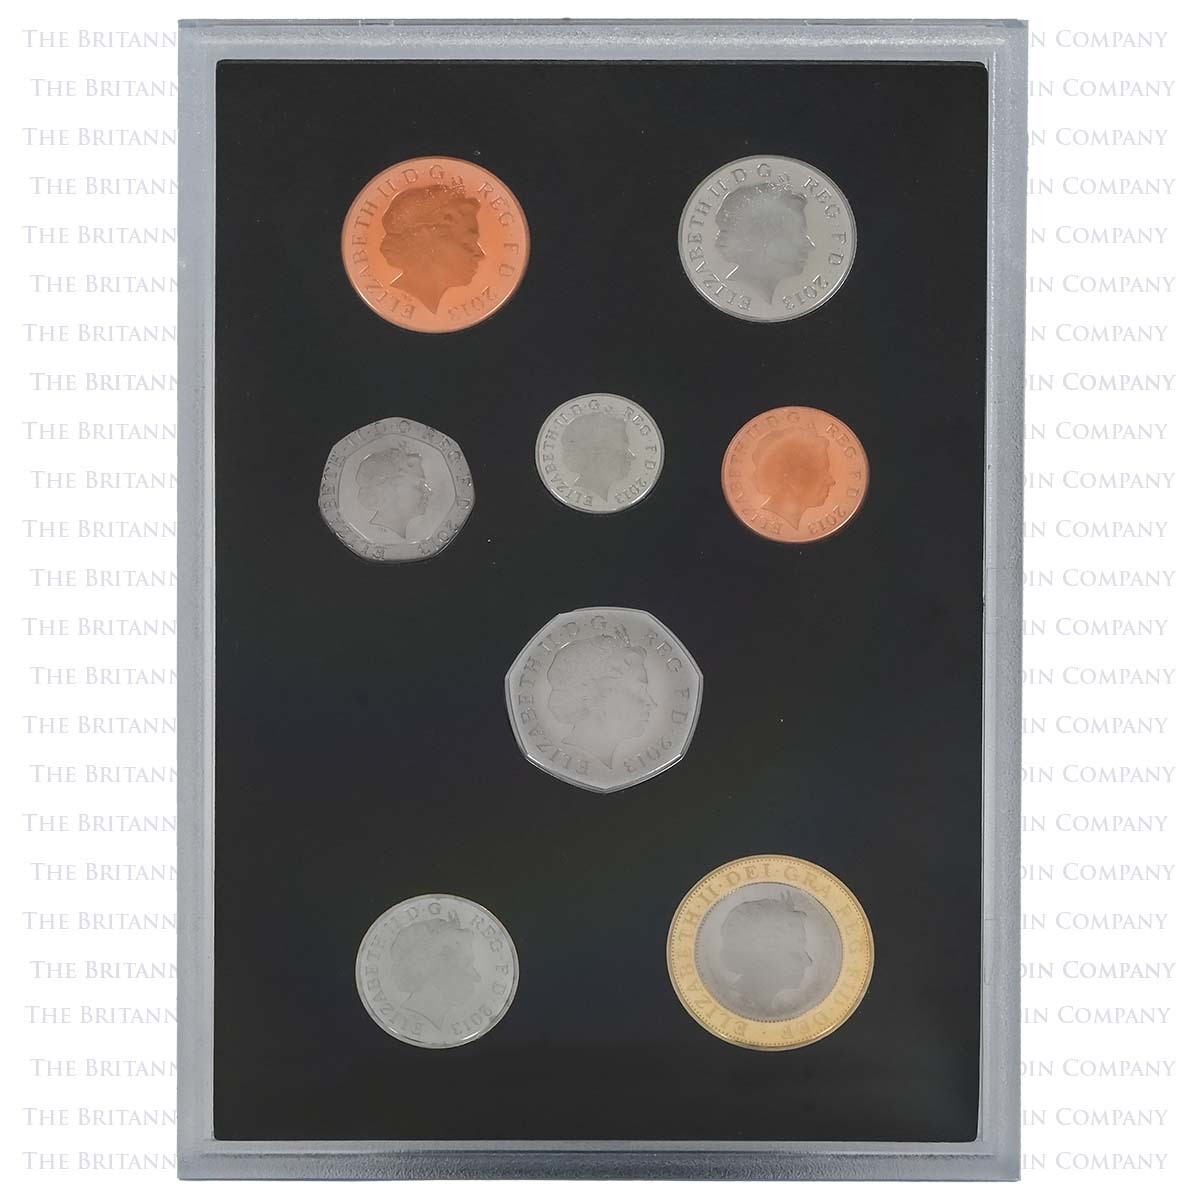 2013-proof-coin-set-collector-edtition-003-m